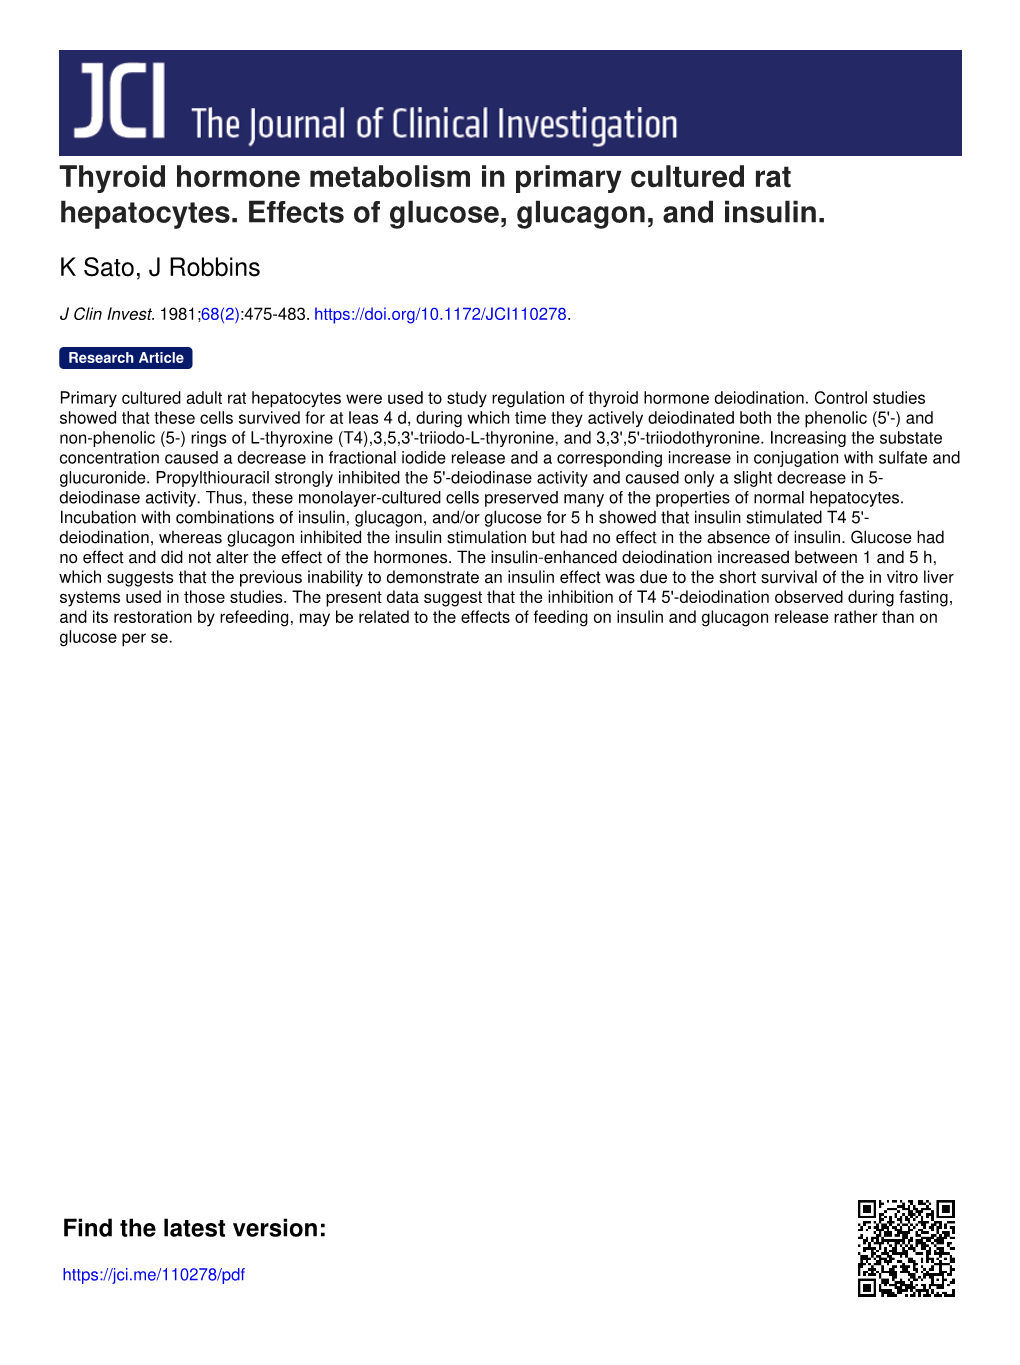 Thyroid Hormone Metabolism in Primary Cultured Rat Hepatocytes. Effects of Glucose, Glucagon, and Insulin